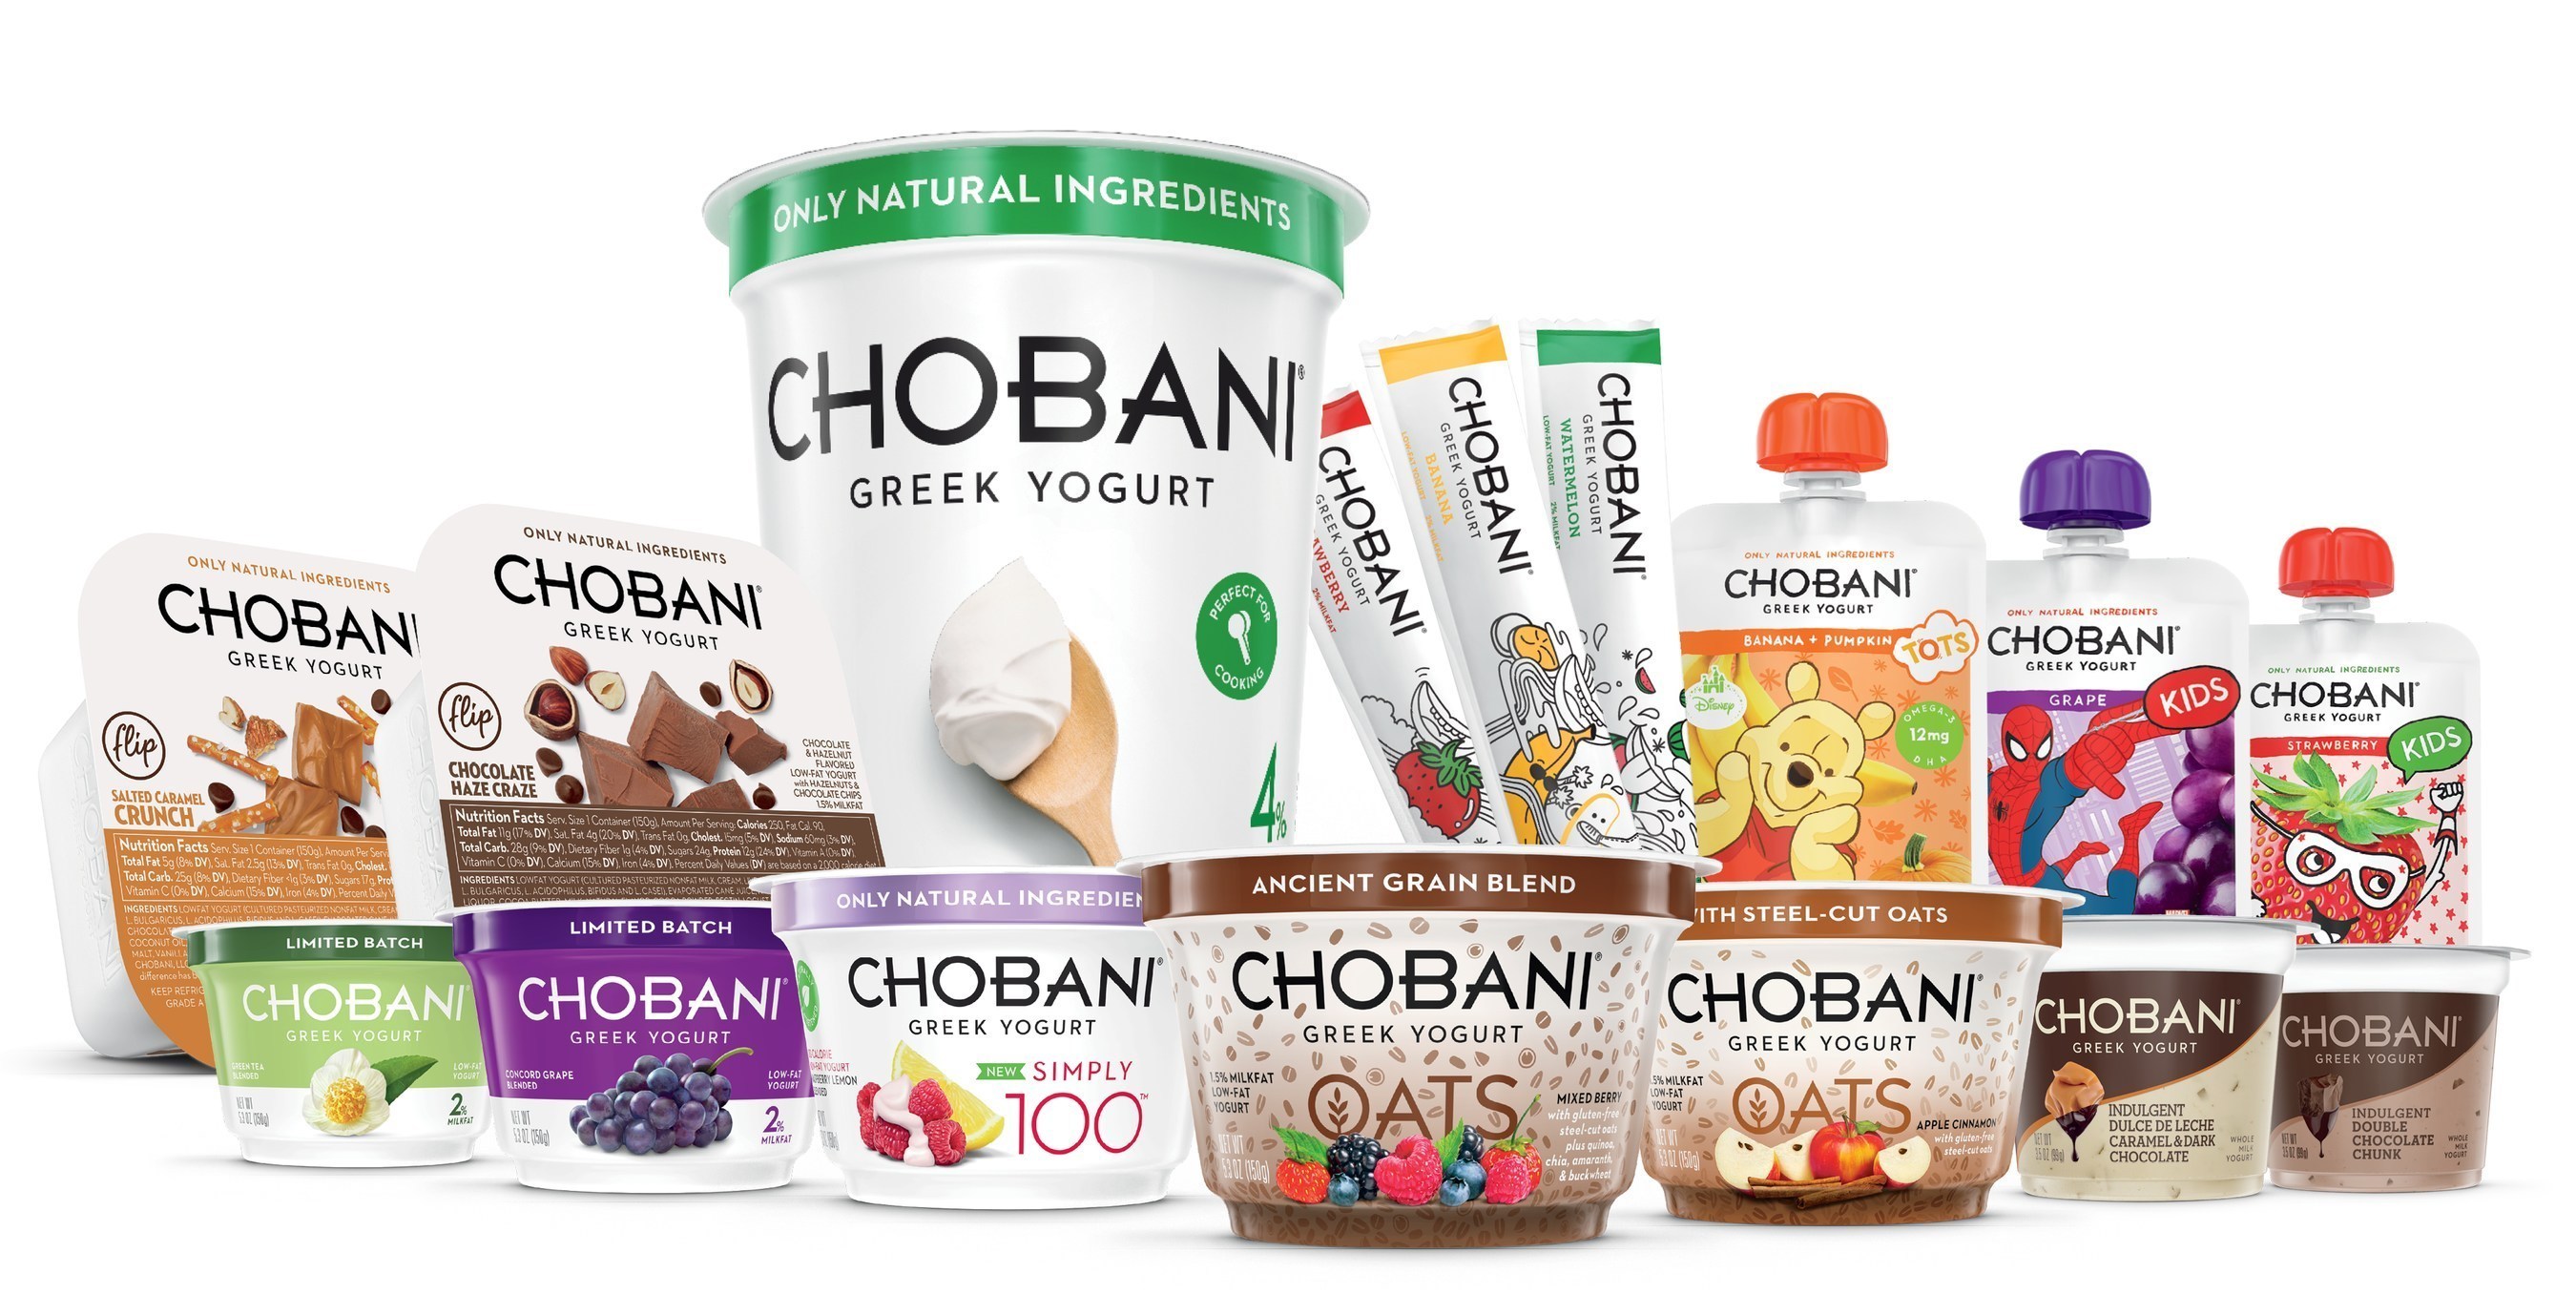 Chobani launches new product innovations in January 2015 to further grow the category